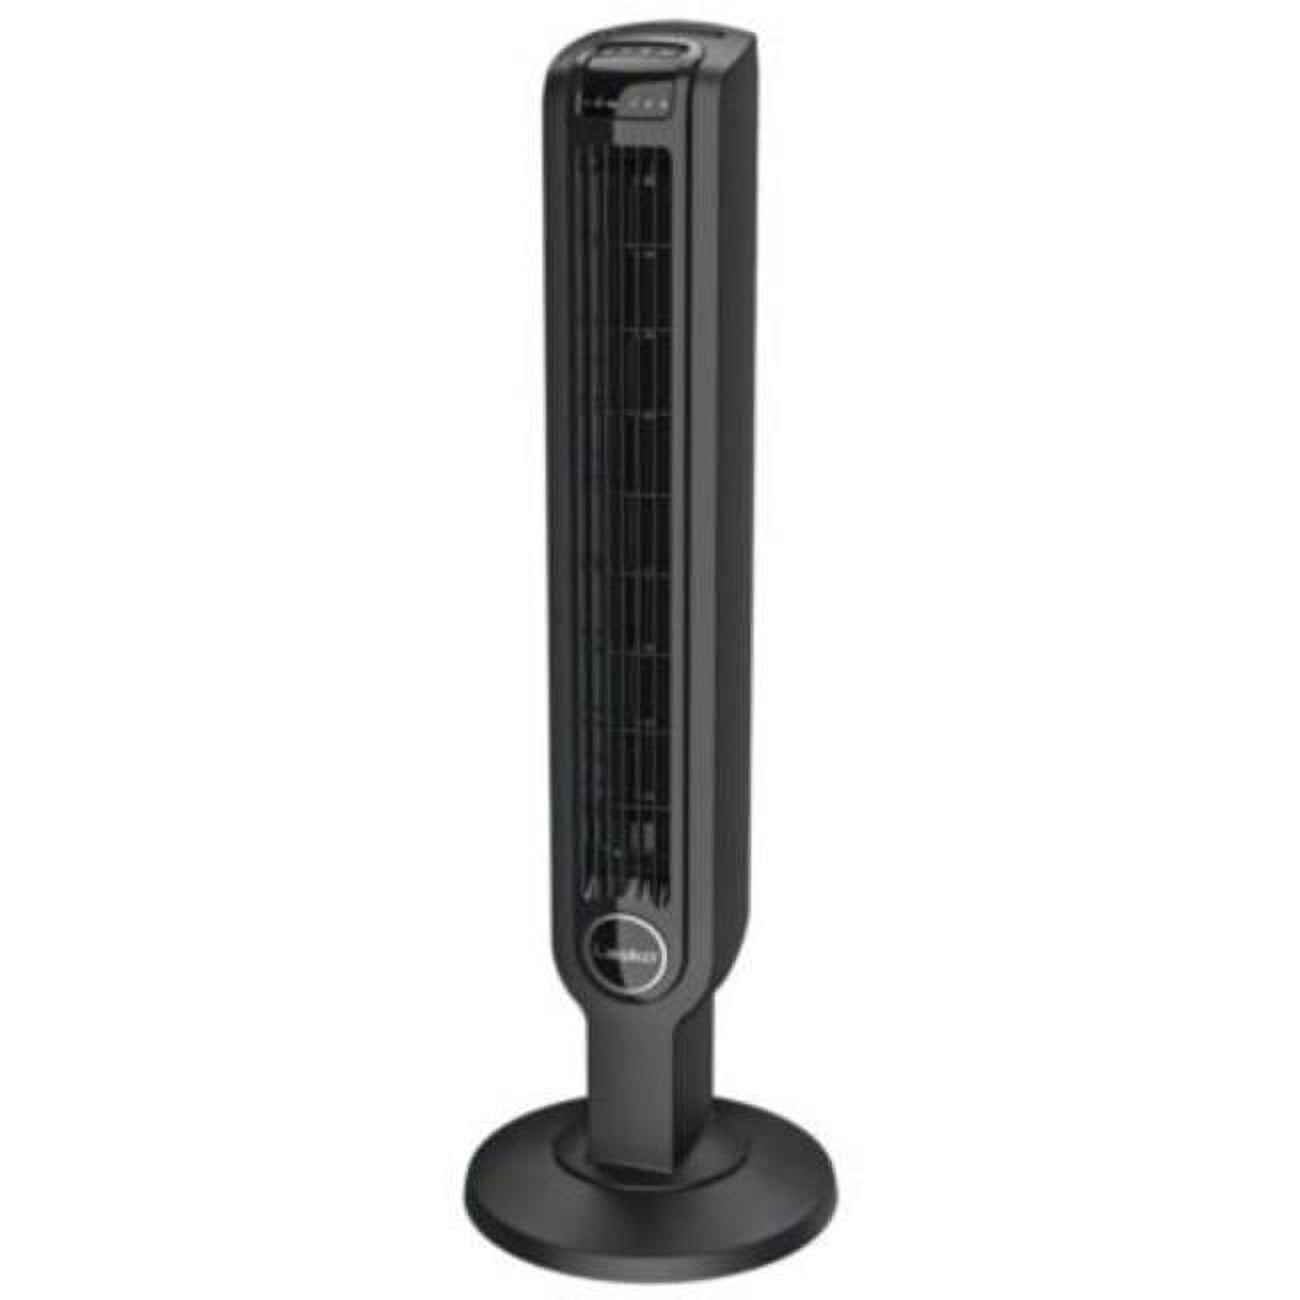 Picture of Lasko T36211 Tower Fan with Remote Control for Replaces 2511